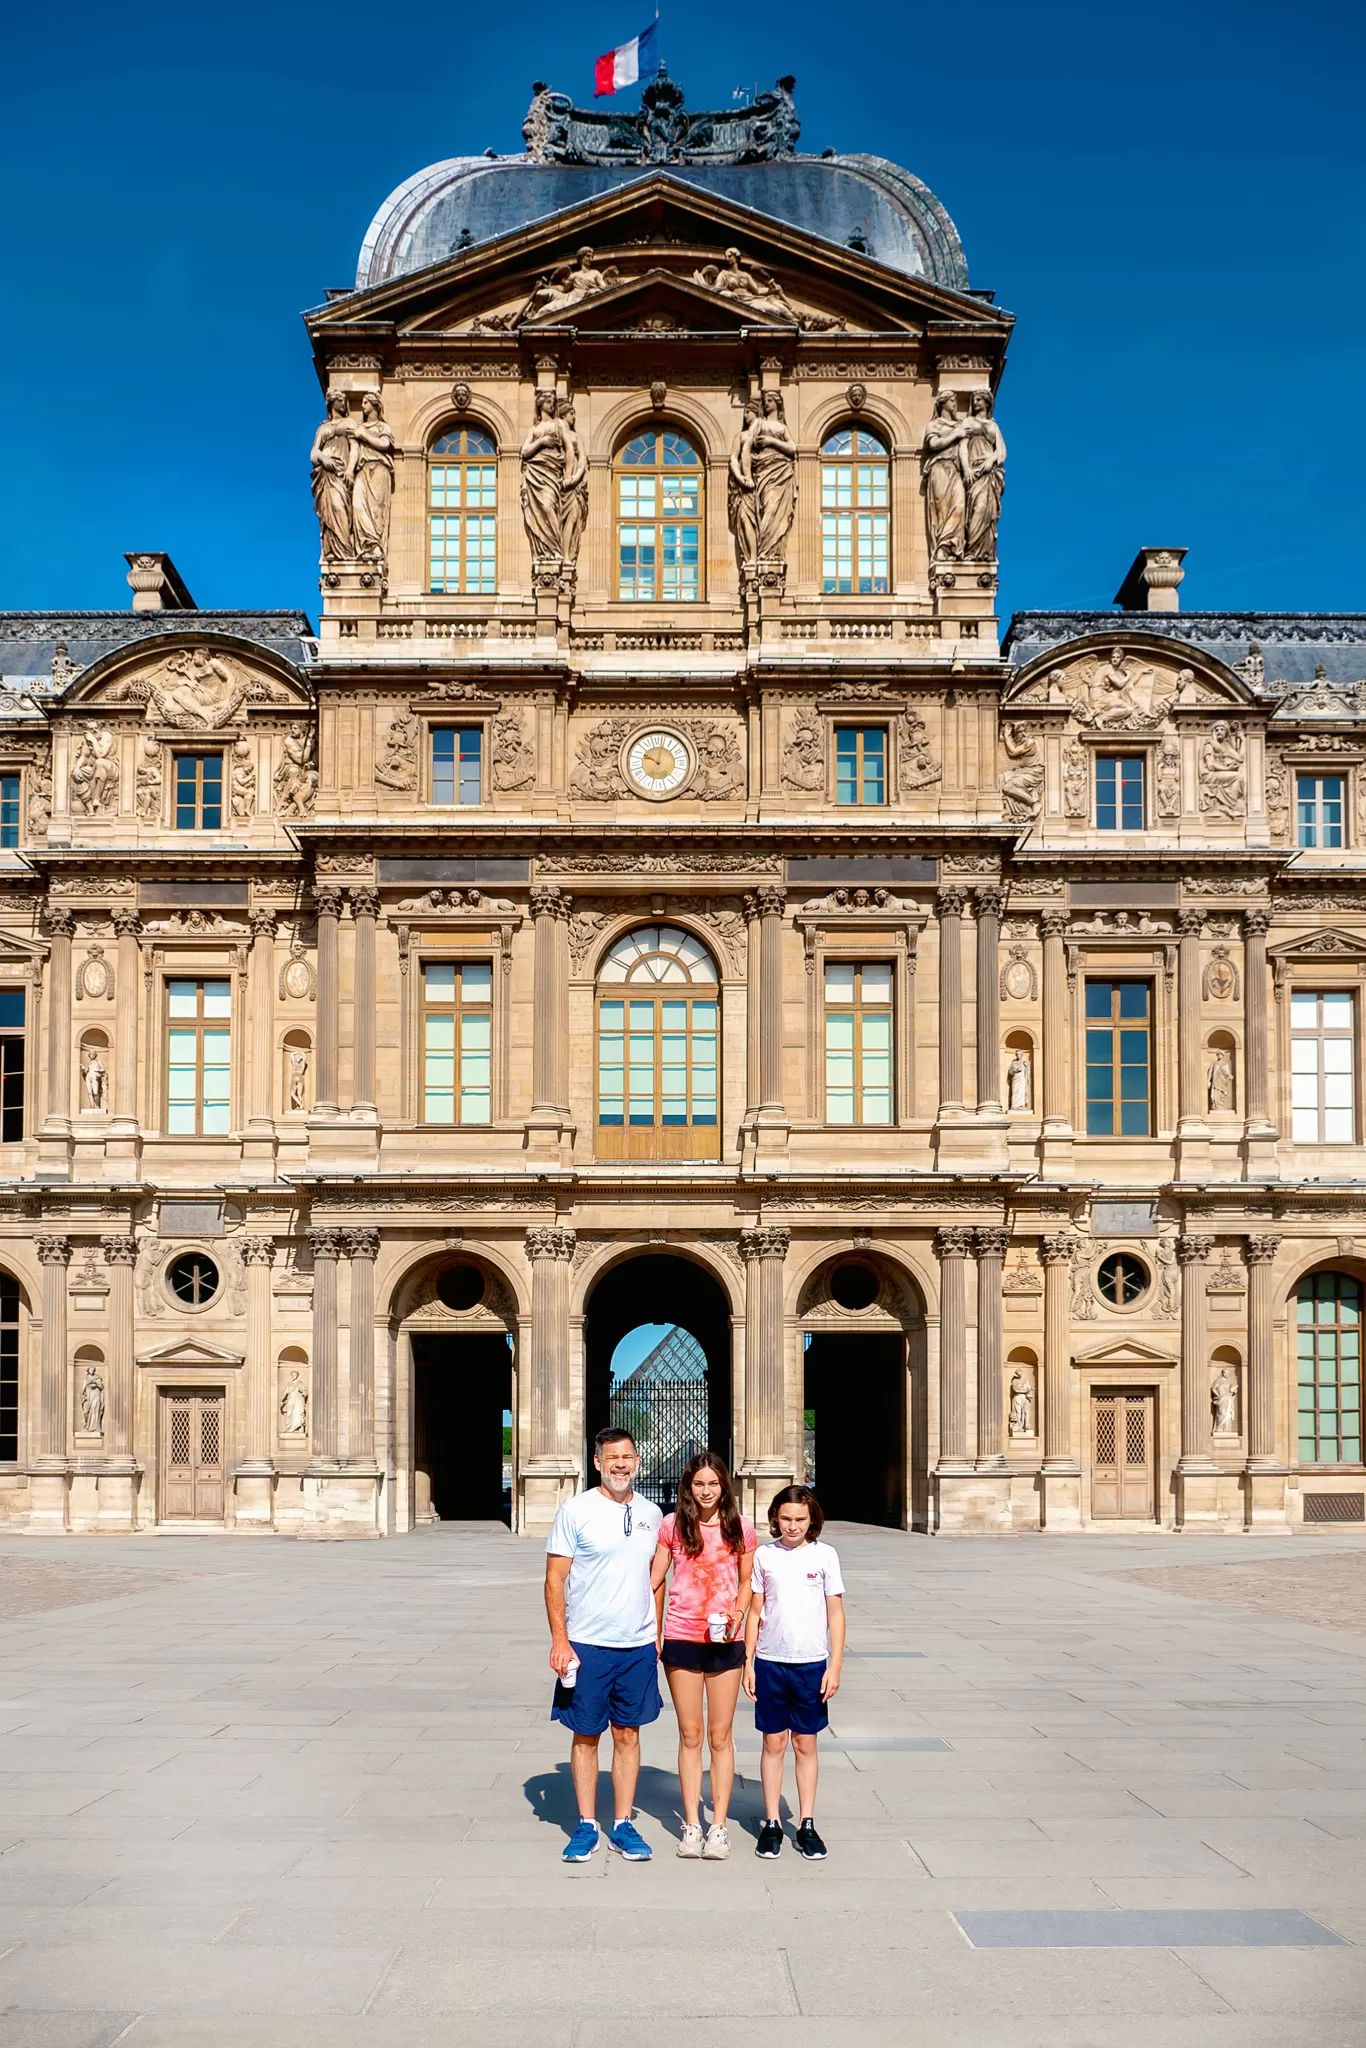 Blog post about things not to forget when traveling to Europe.  The image shows a dad and two kids standing in central Paris, France.  They are standing in front of the back side of the Louvre. 